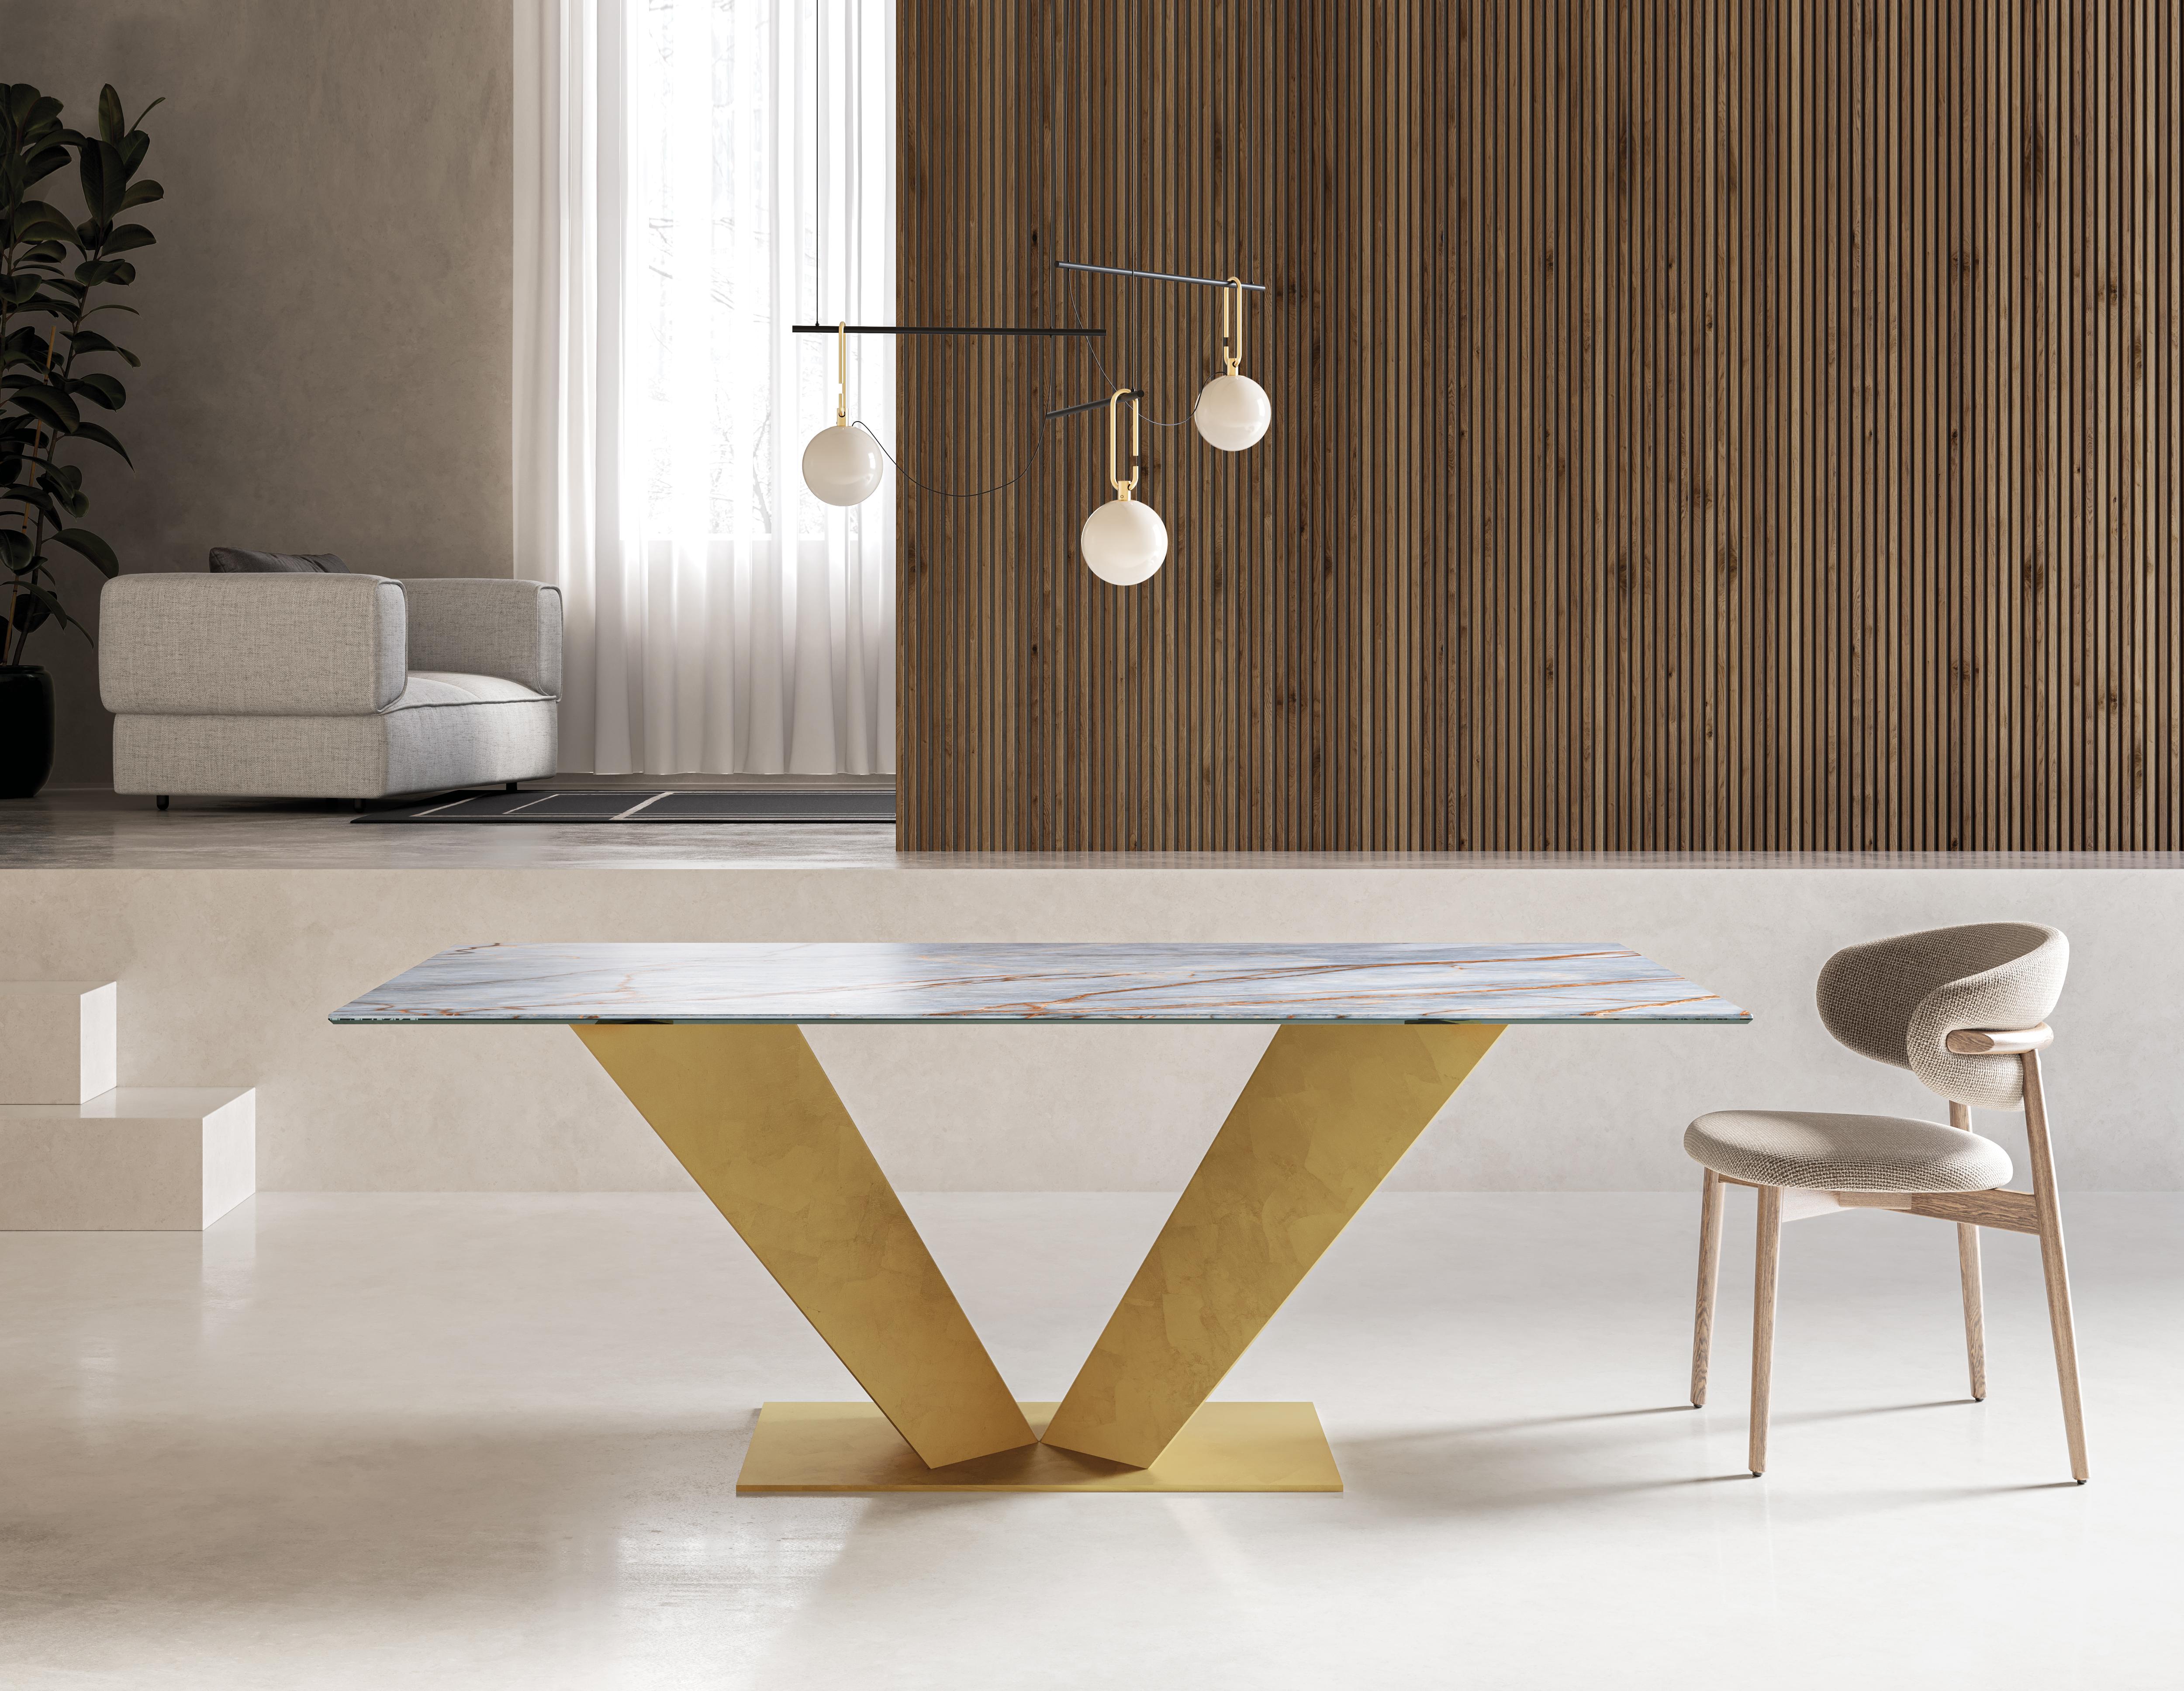 Ares Dining Table by Chinellato Design
Dimensions: W 250 x D 120 x H 72 cm
Materials: 
Top: Heritage Blue glossy Ceramic top and an Extra Clear Tempered Glass under-top.
Base: Large Piece Gold Leaf finish.


Ares, a rectangular dining table